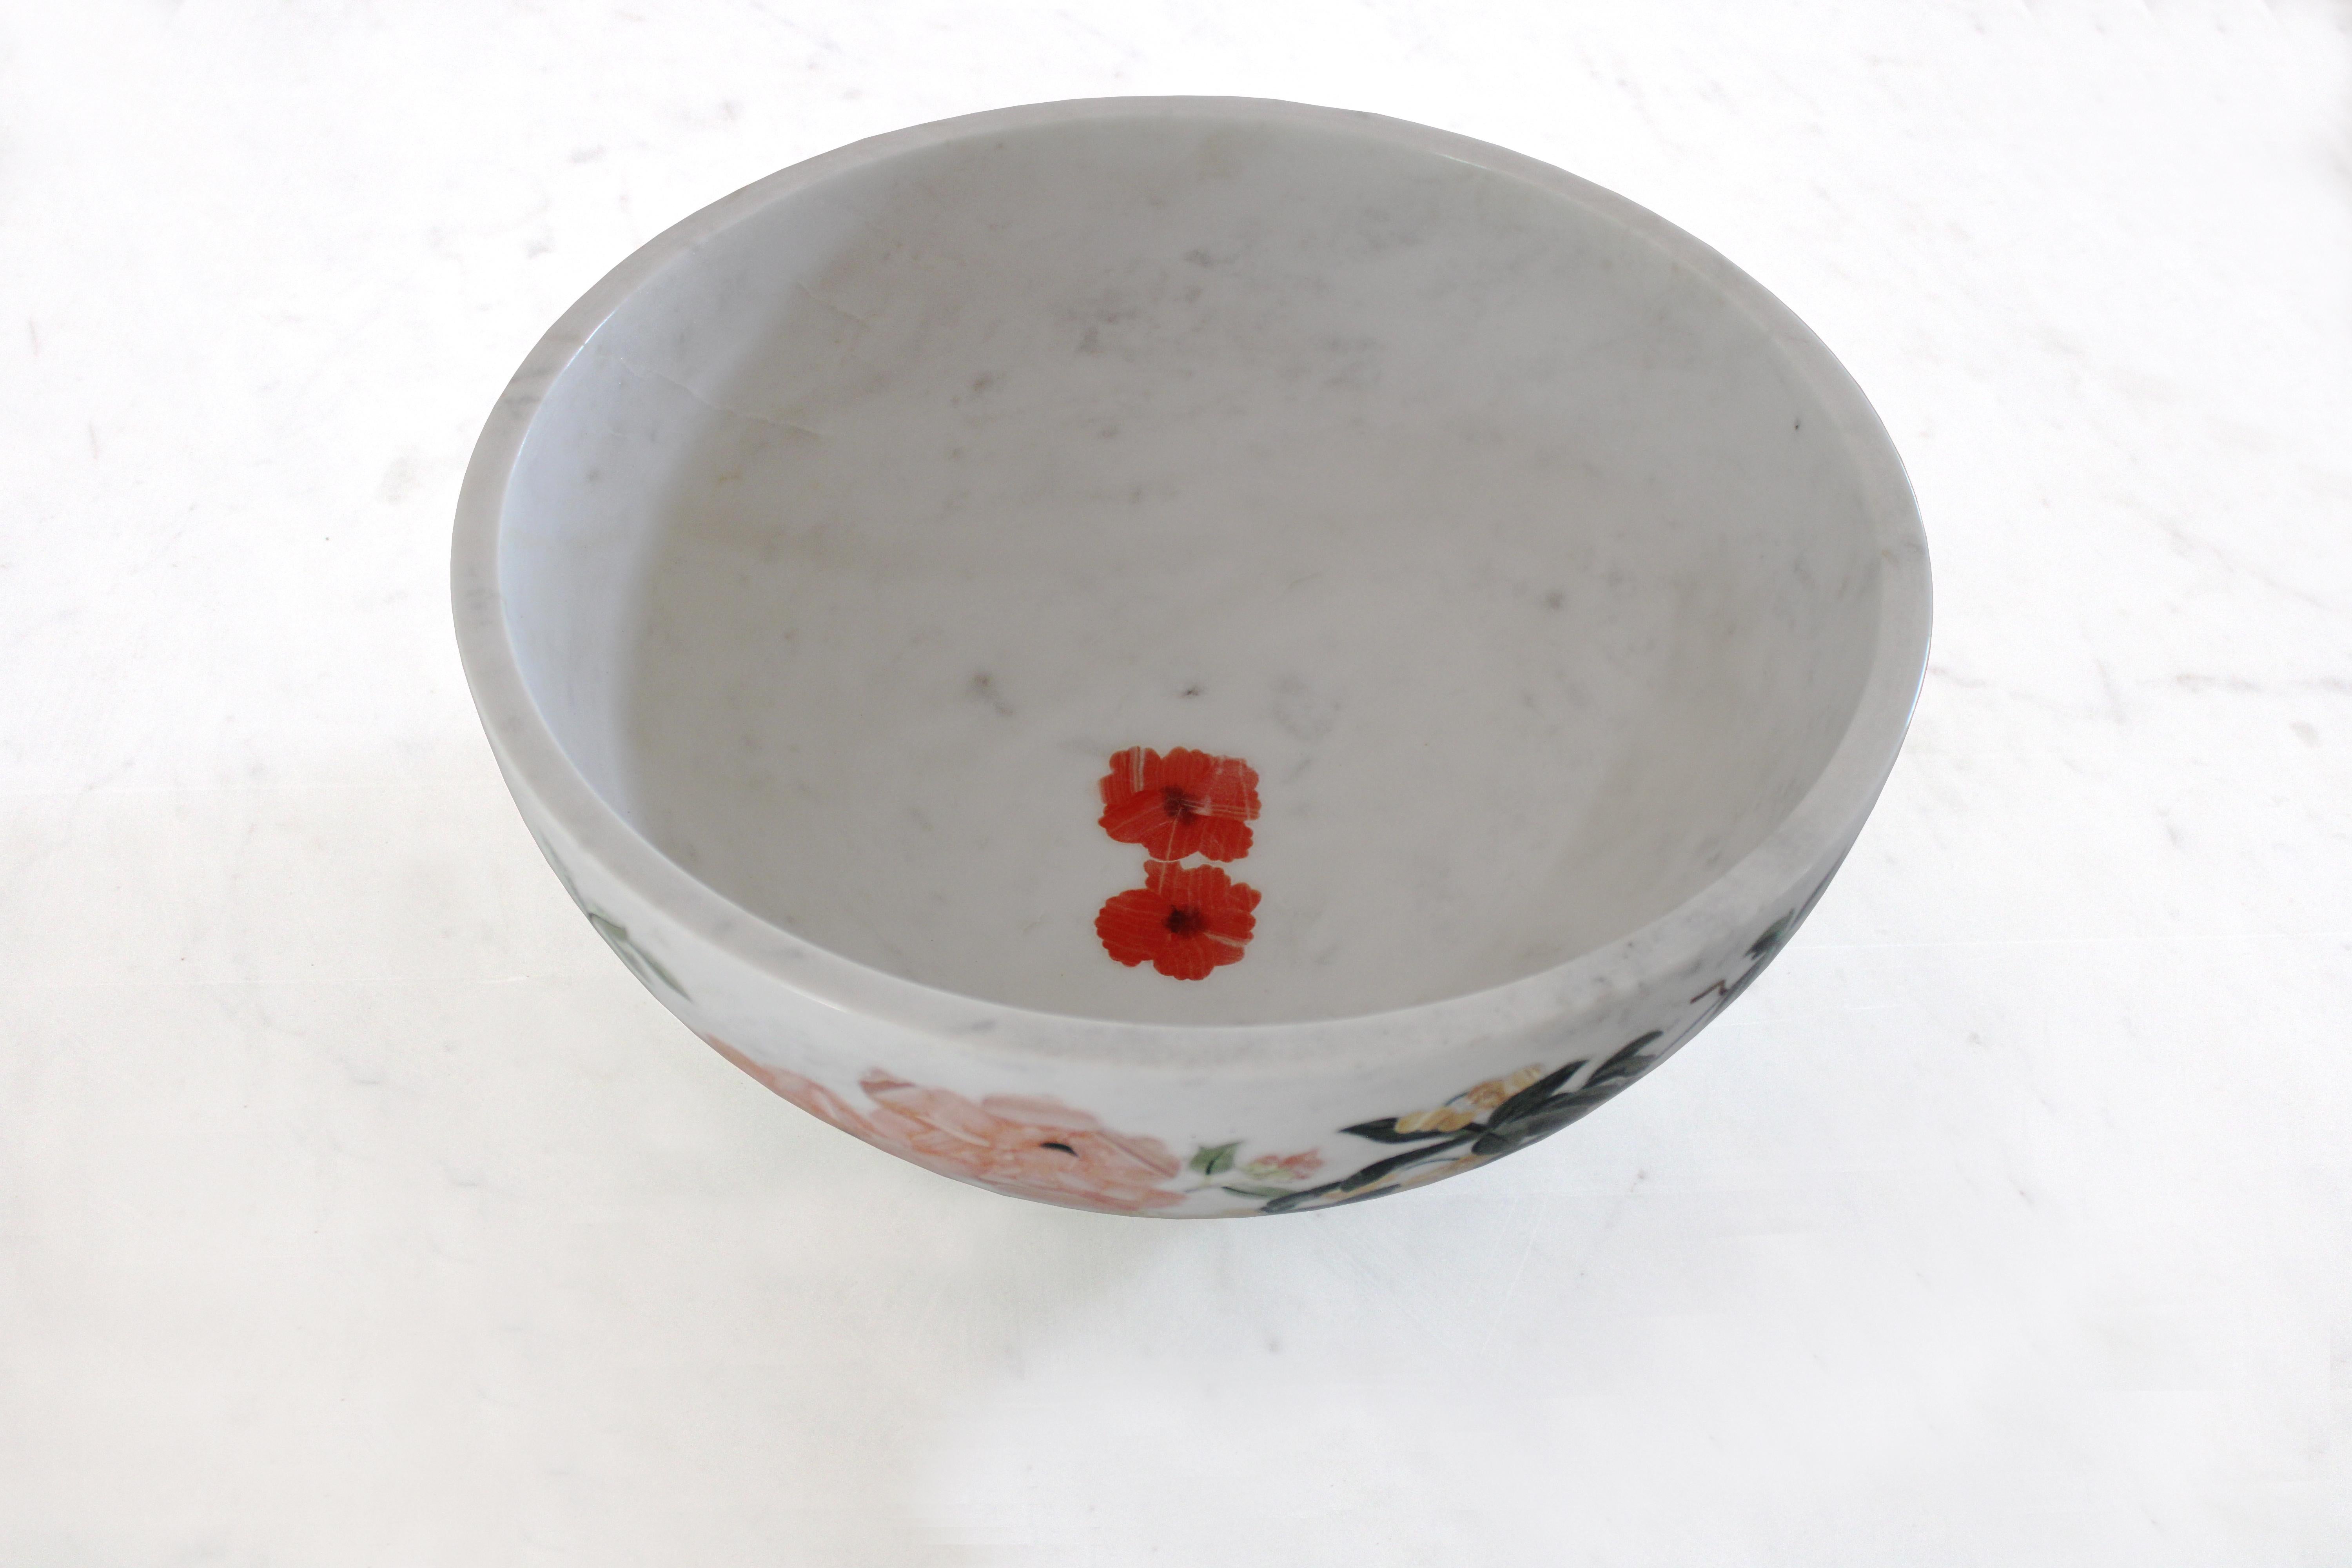 Handmade Ornamenti Bowl Inlay in White Marble by Stephanie Odegard is one of the best examples of reproduction of the Pietra Dura technique. This richly designed bowl is full of precious and semi precious stone inlays. This Bowl Inlayed with Semi